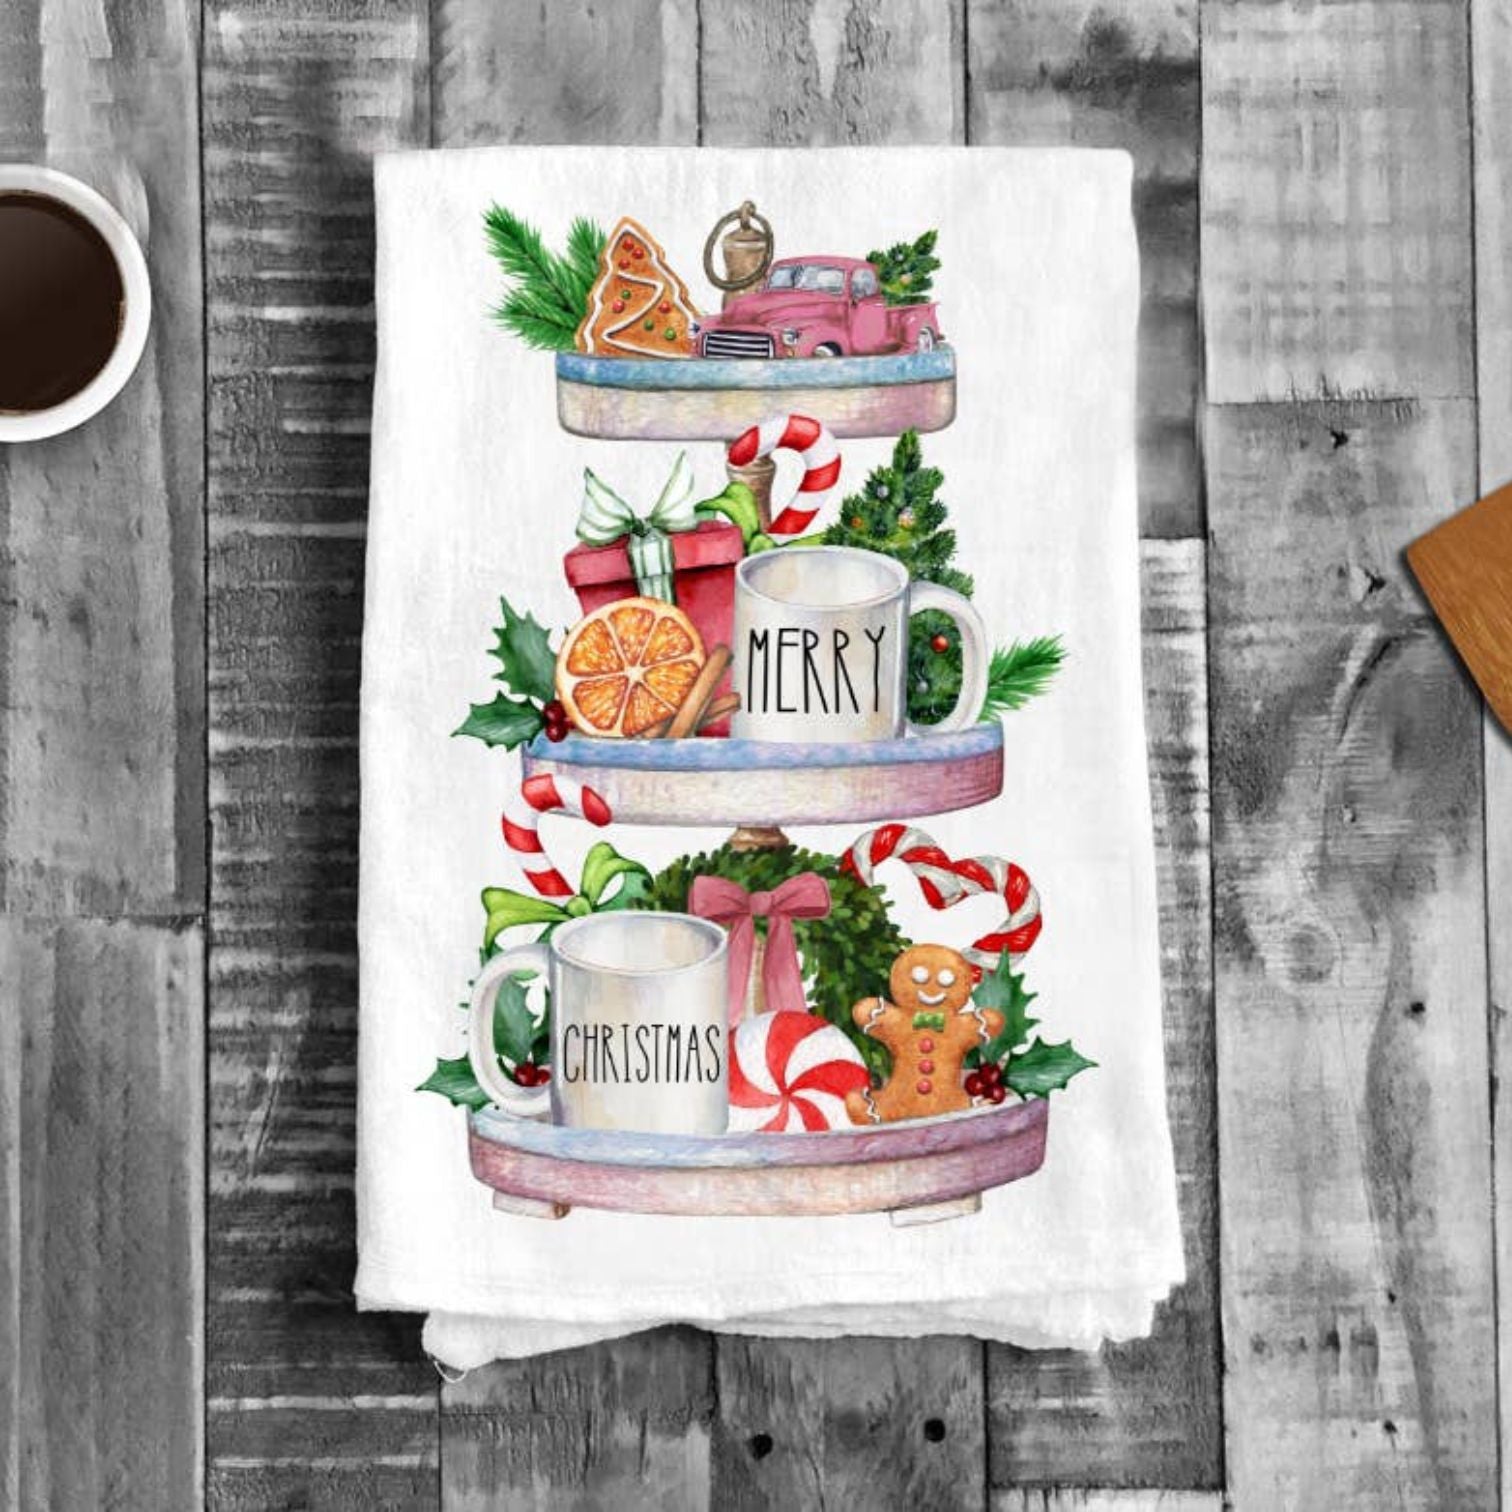 Merry Christmas Festive Tray Gingerbread, Cotton Tea Towels